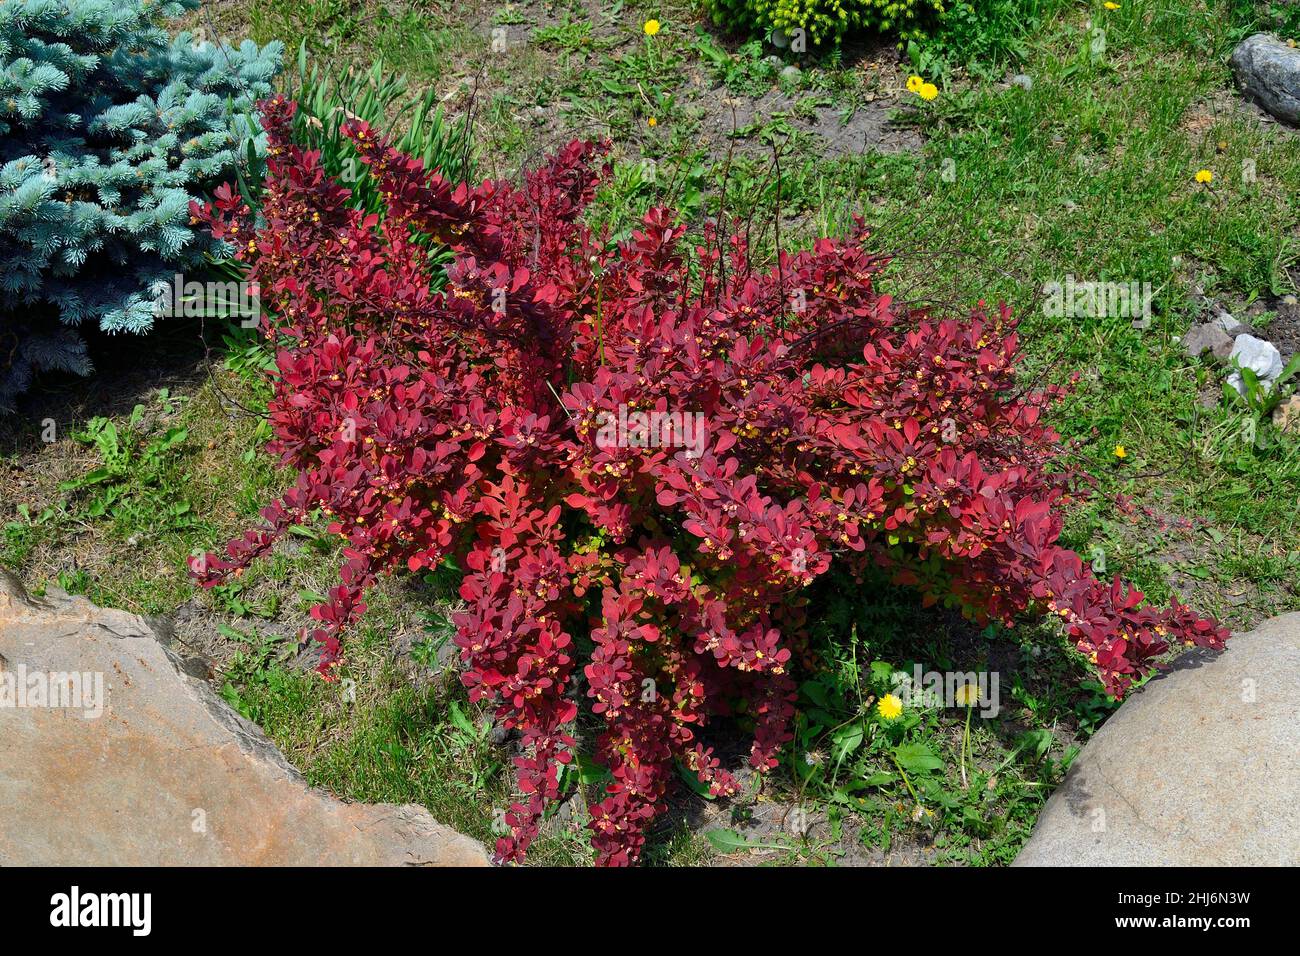 Flowering barberry bush Berberis Thunbergii, variety Red carpet with bright red foliage and yellow flowers in spring garden among stones. Decorative l Stock Photo